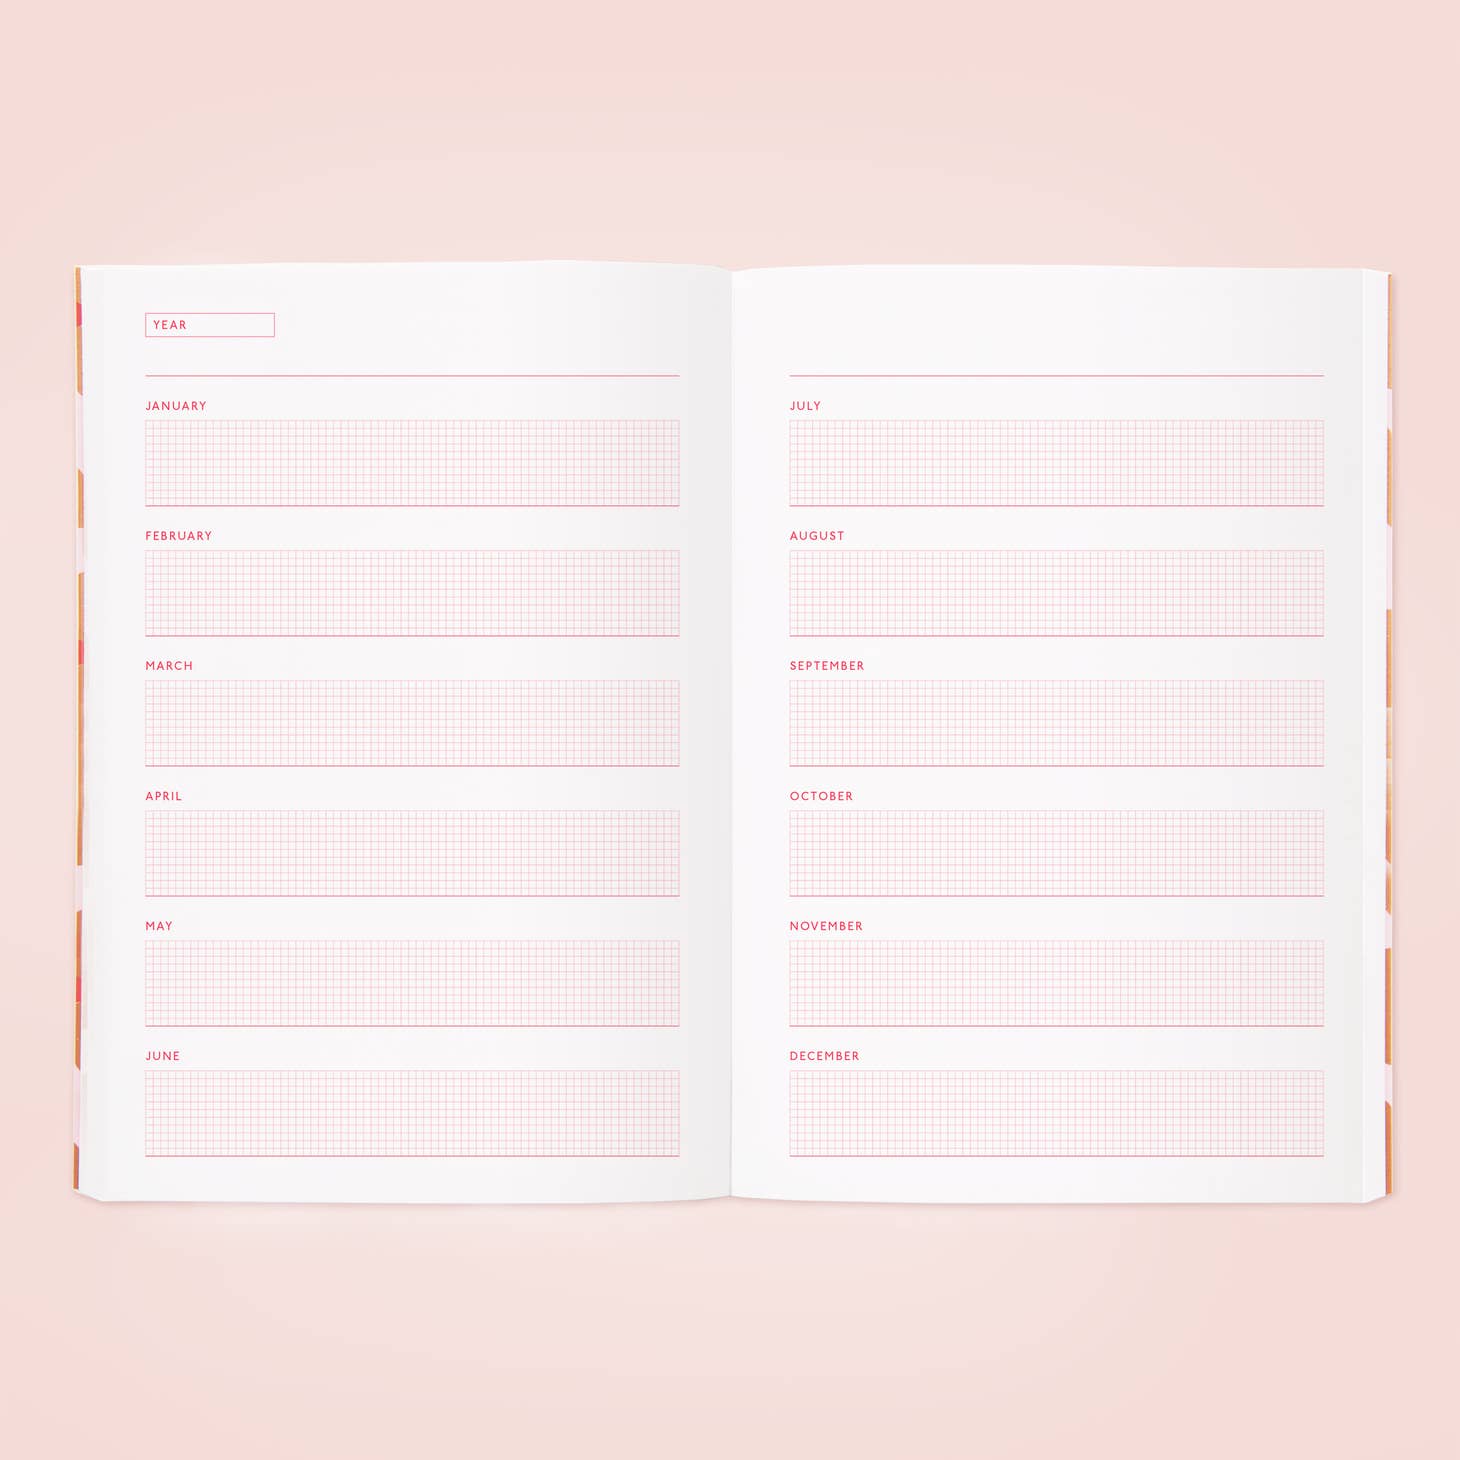 Image of year pages with grided blocks  for each month in pink text.    